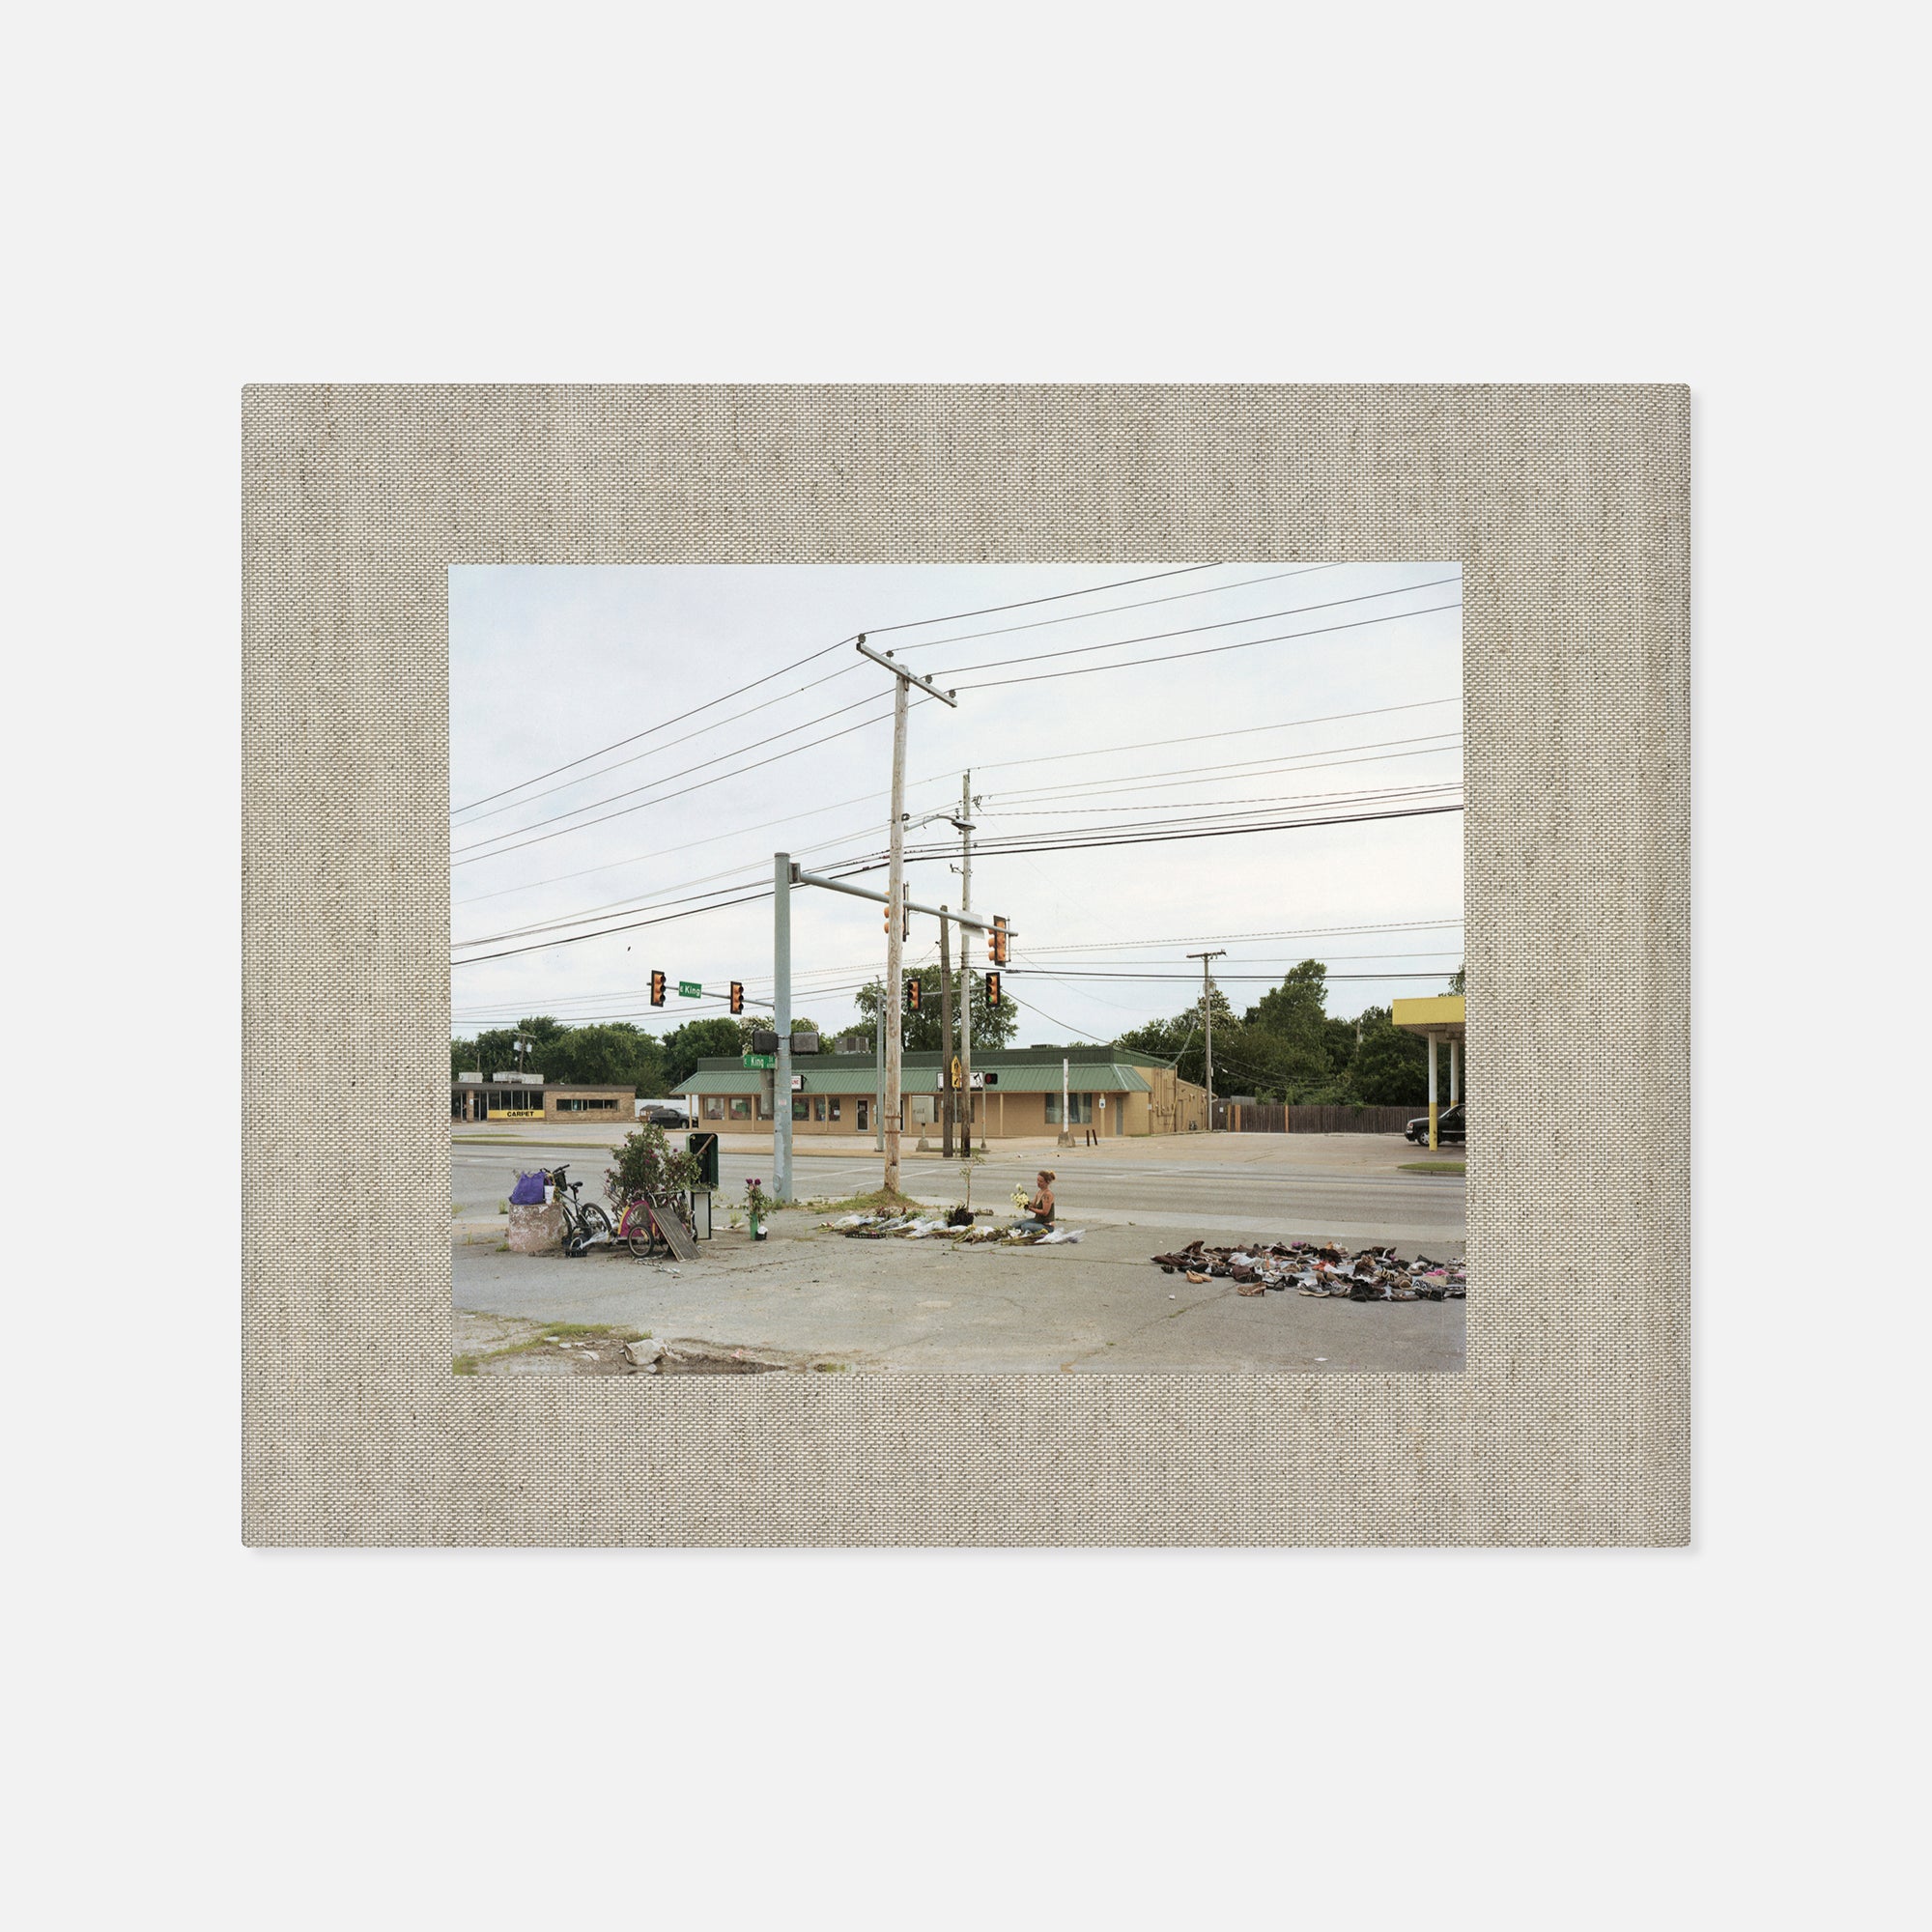 Alec Soth — A Pound of Pictures